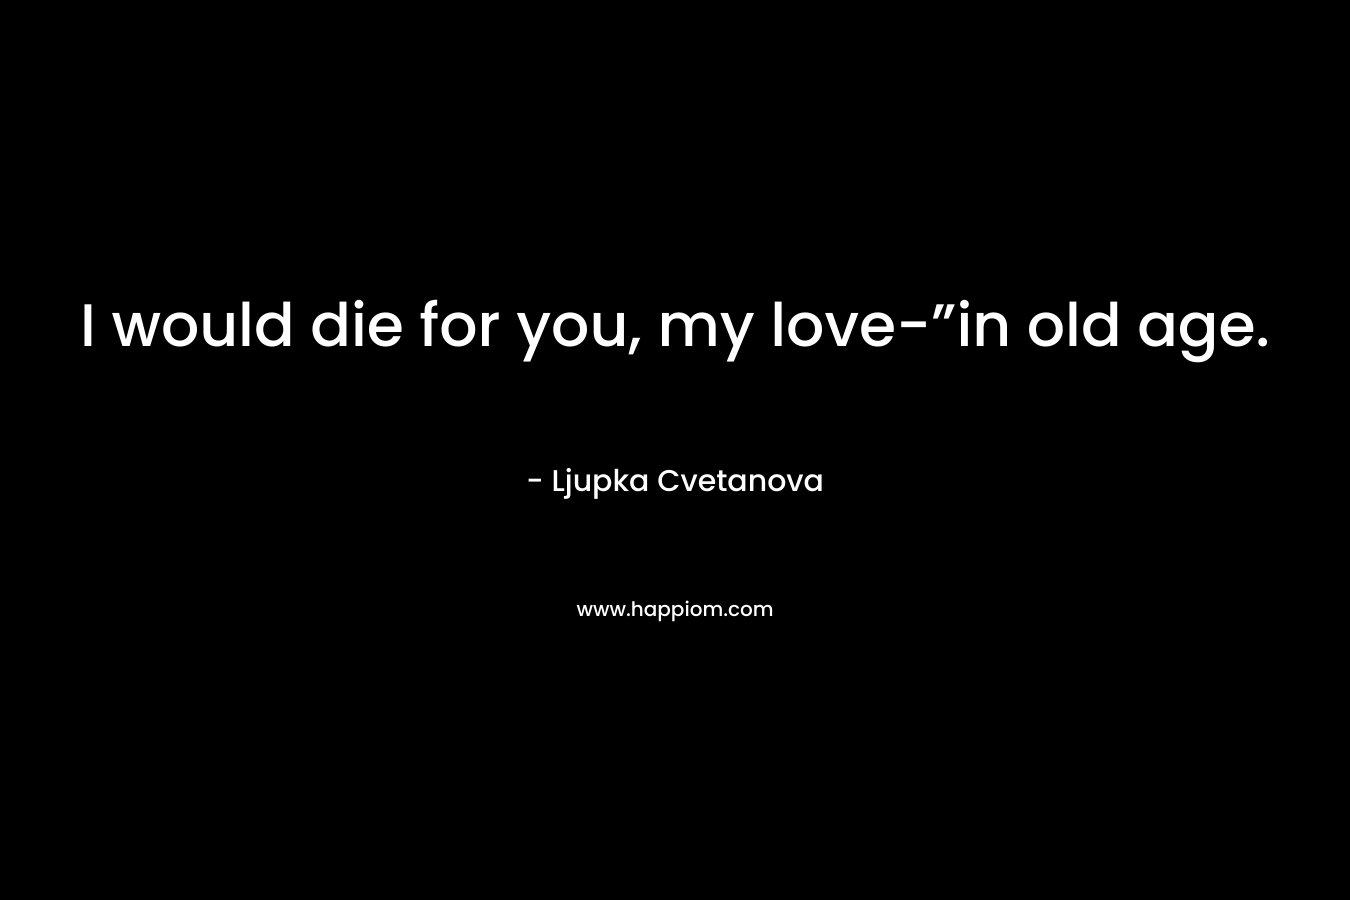 I would die for you, my love-”in old age.